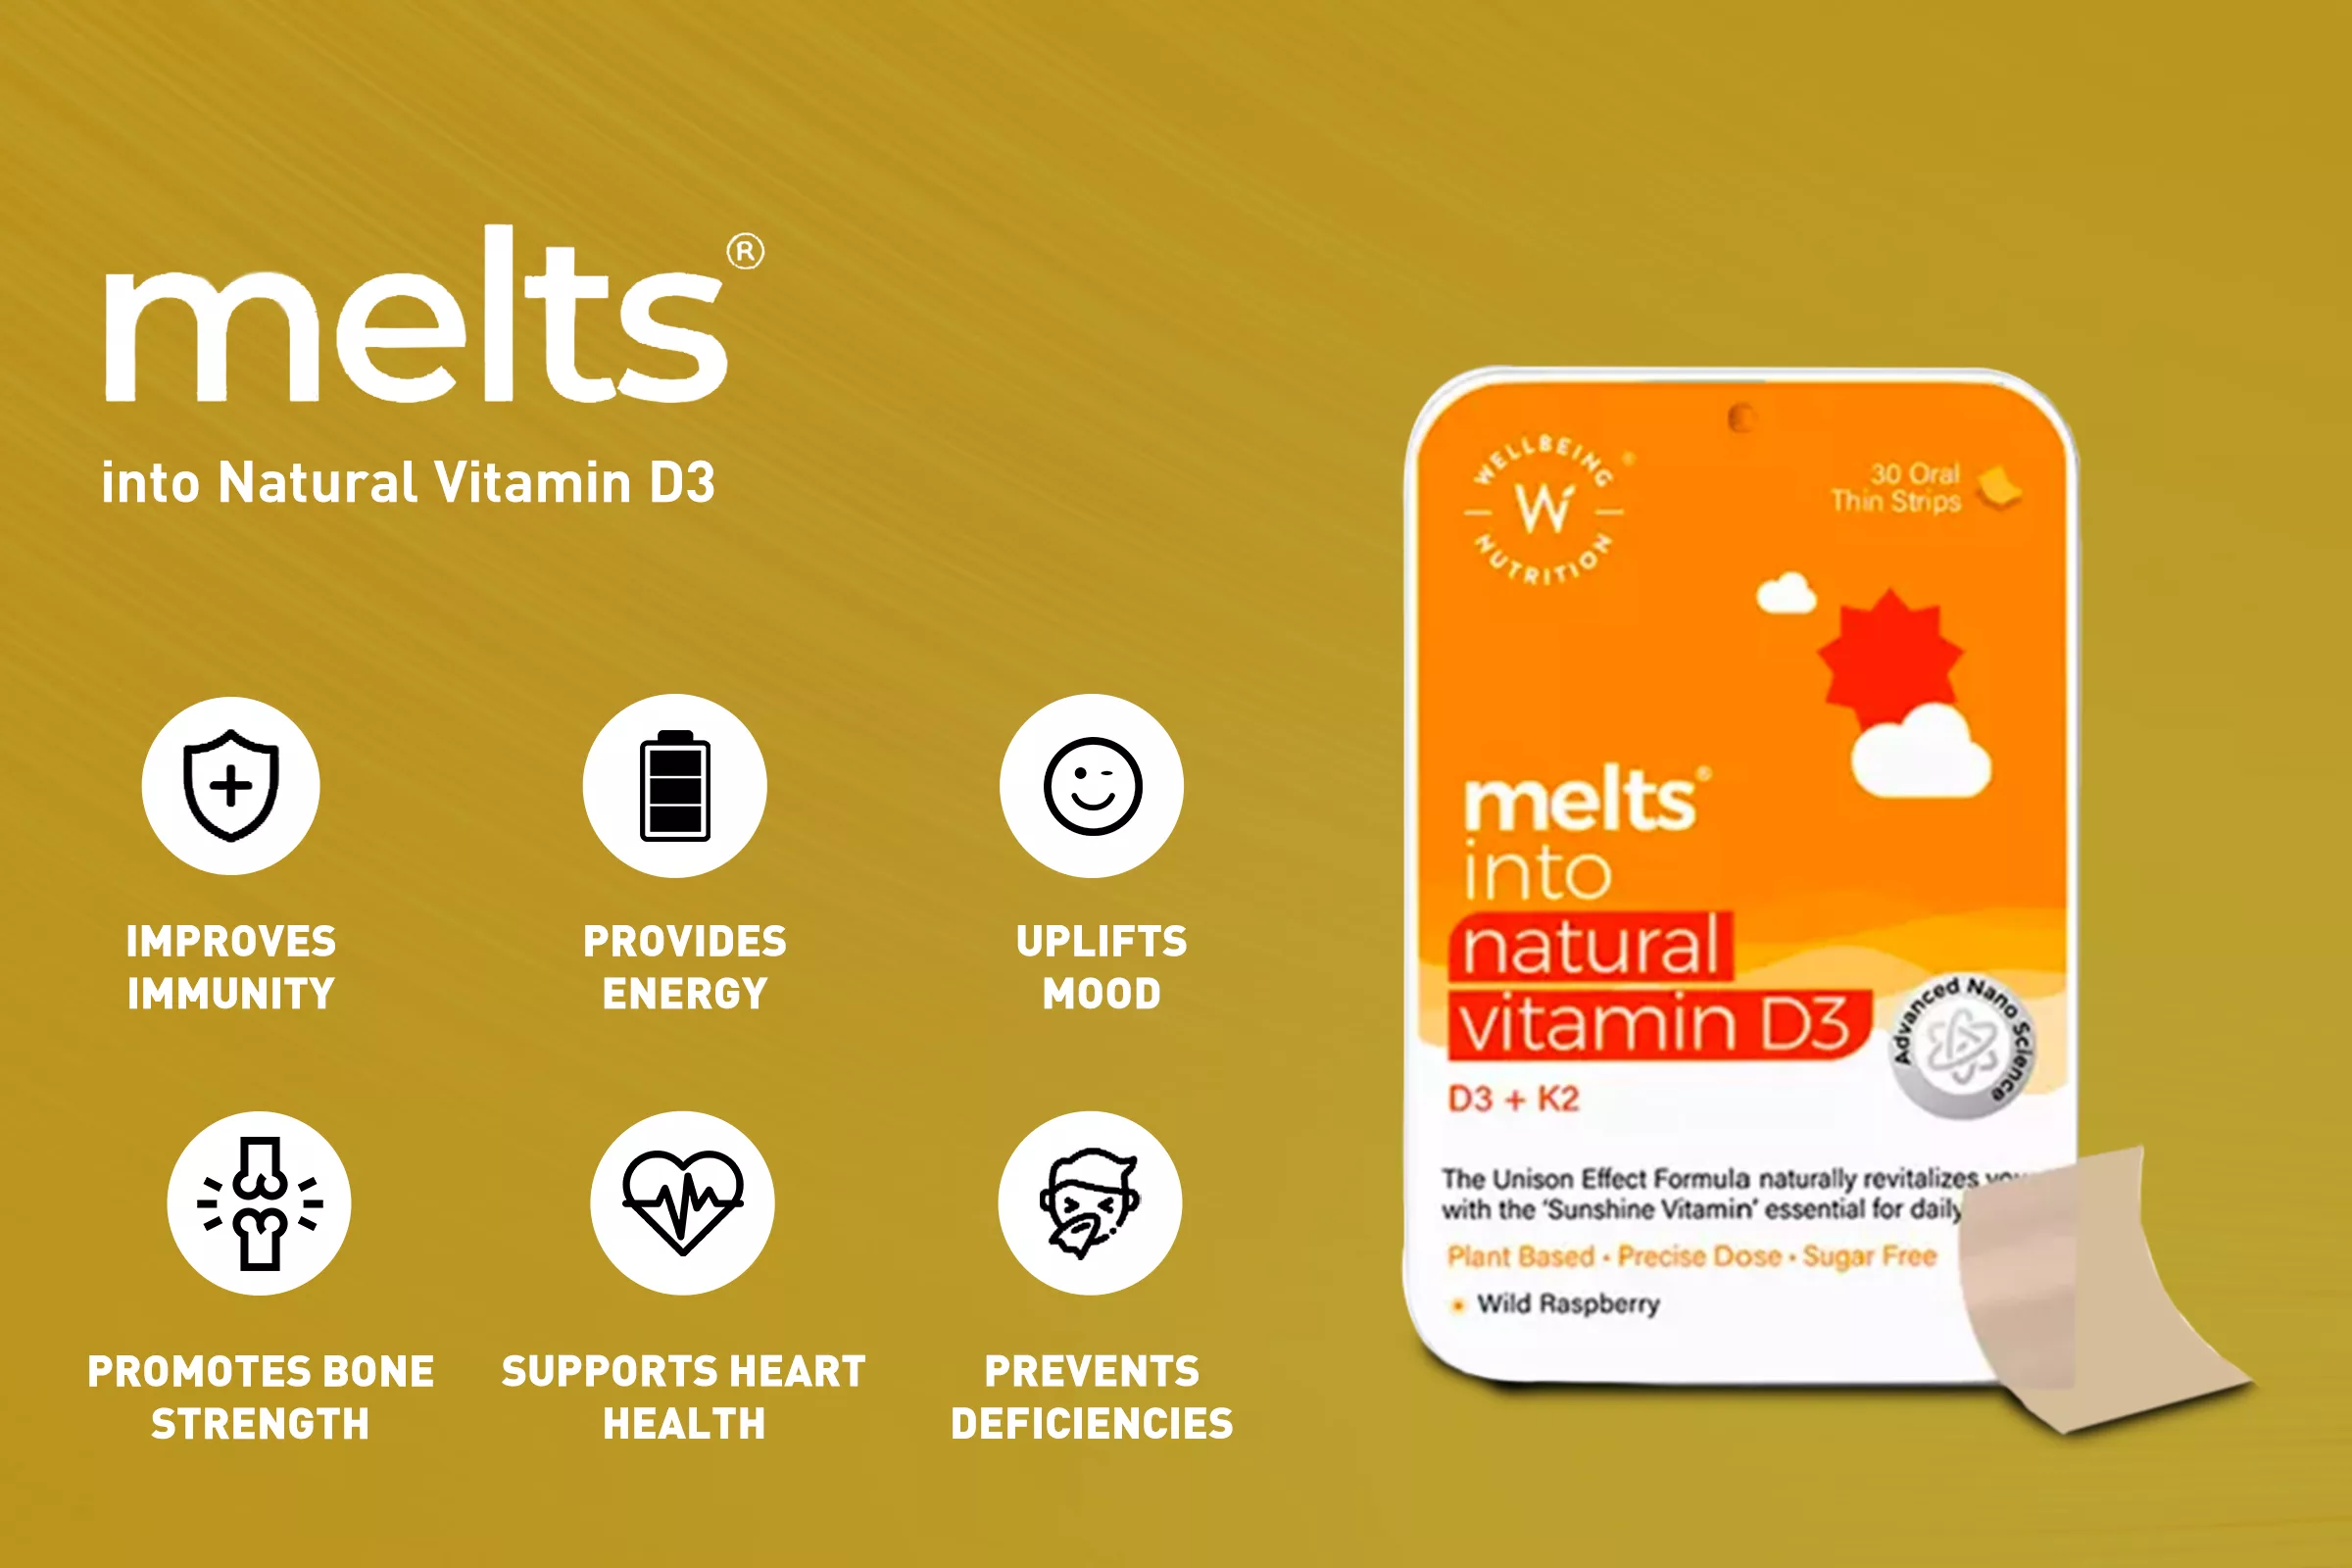 Highlights of Wellbeing Nutrition Vitamin D3